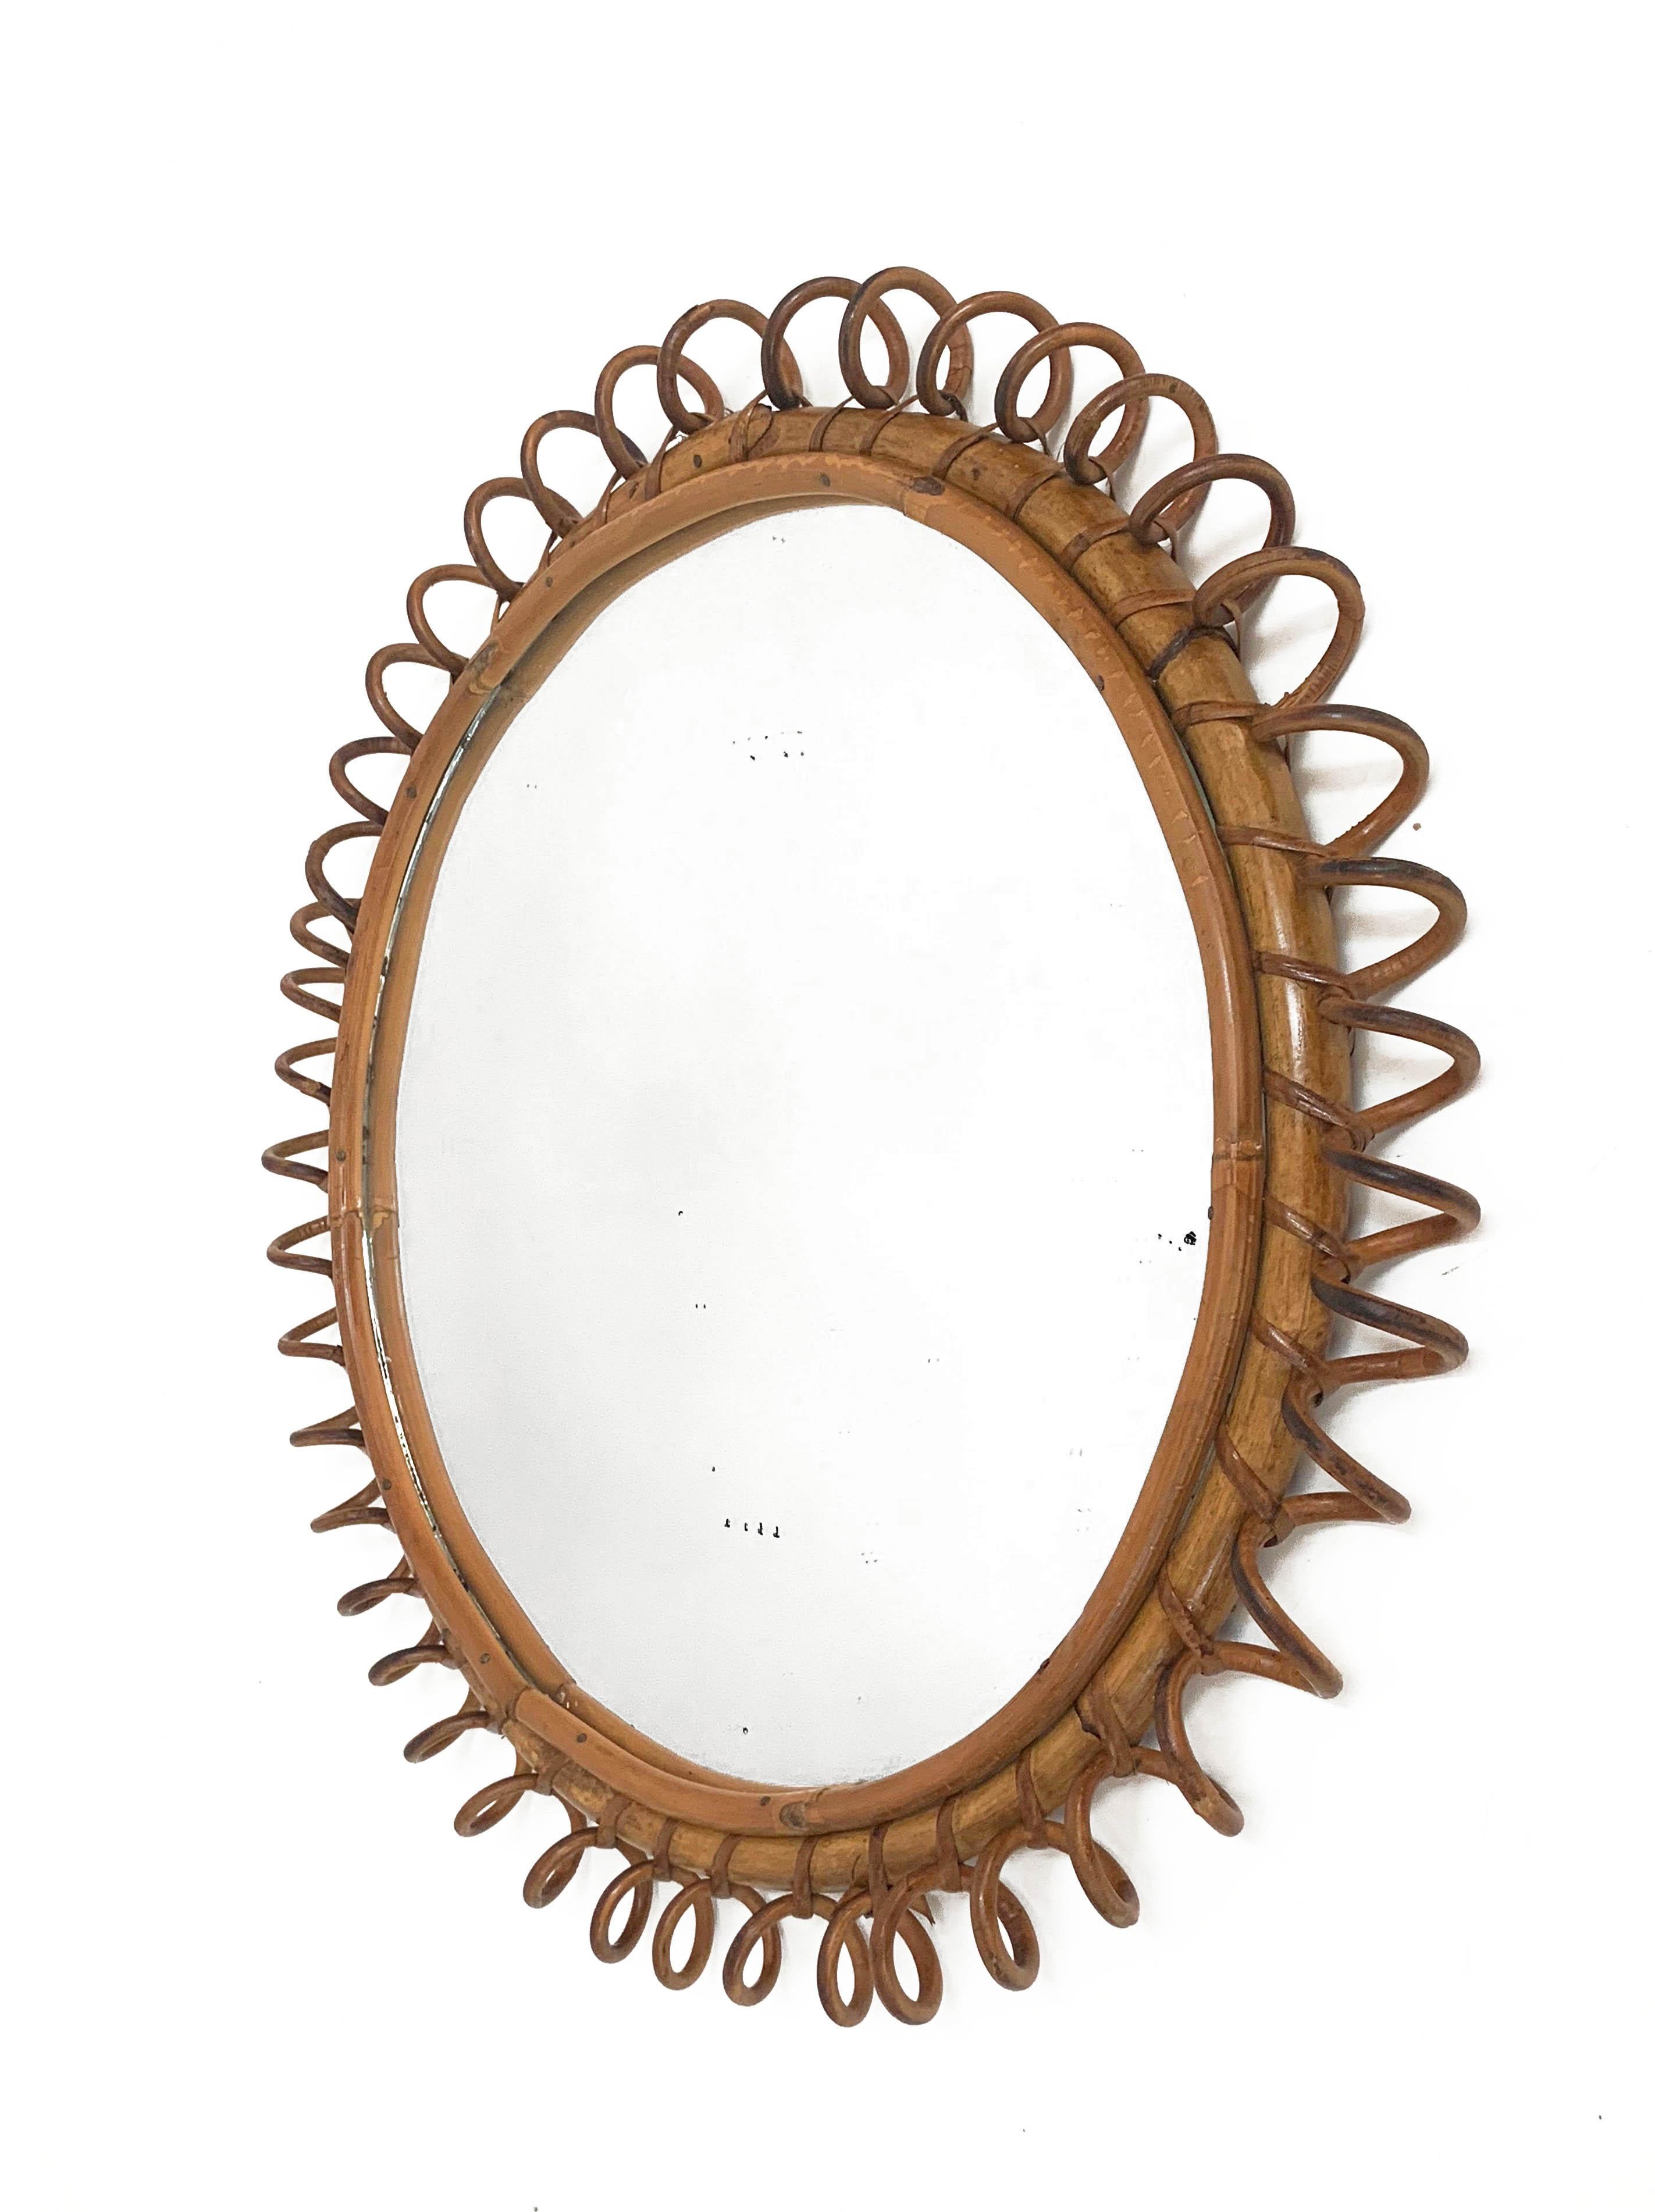 Amazing midcentury round rattan wall mirror. This Mid-Century Modern mirror was produced during the 1970s in Italy.

This wall mirror features a round mirror glass framed by a round bamboo cane and a rattan star shaped frame.

Beautiful placed